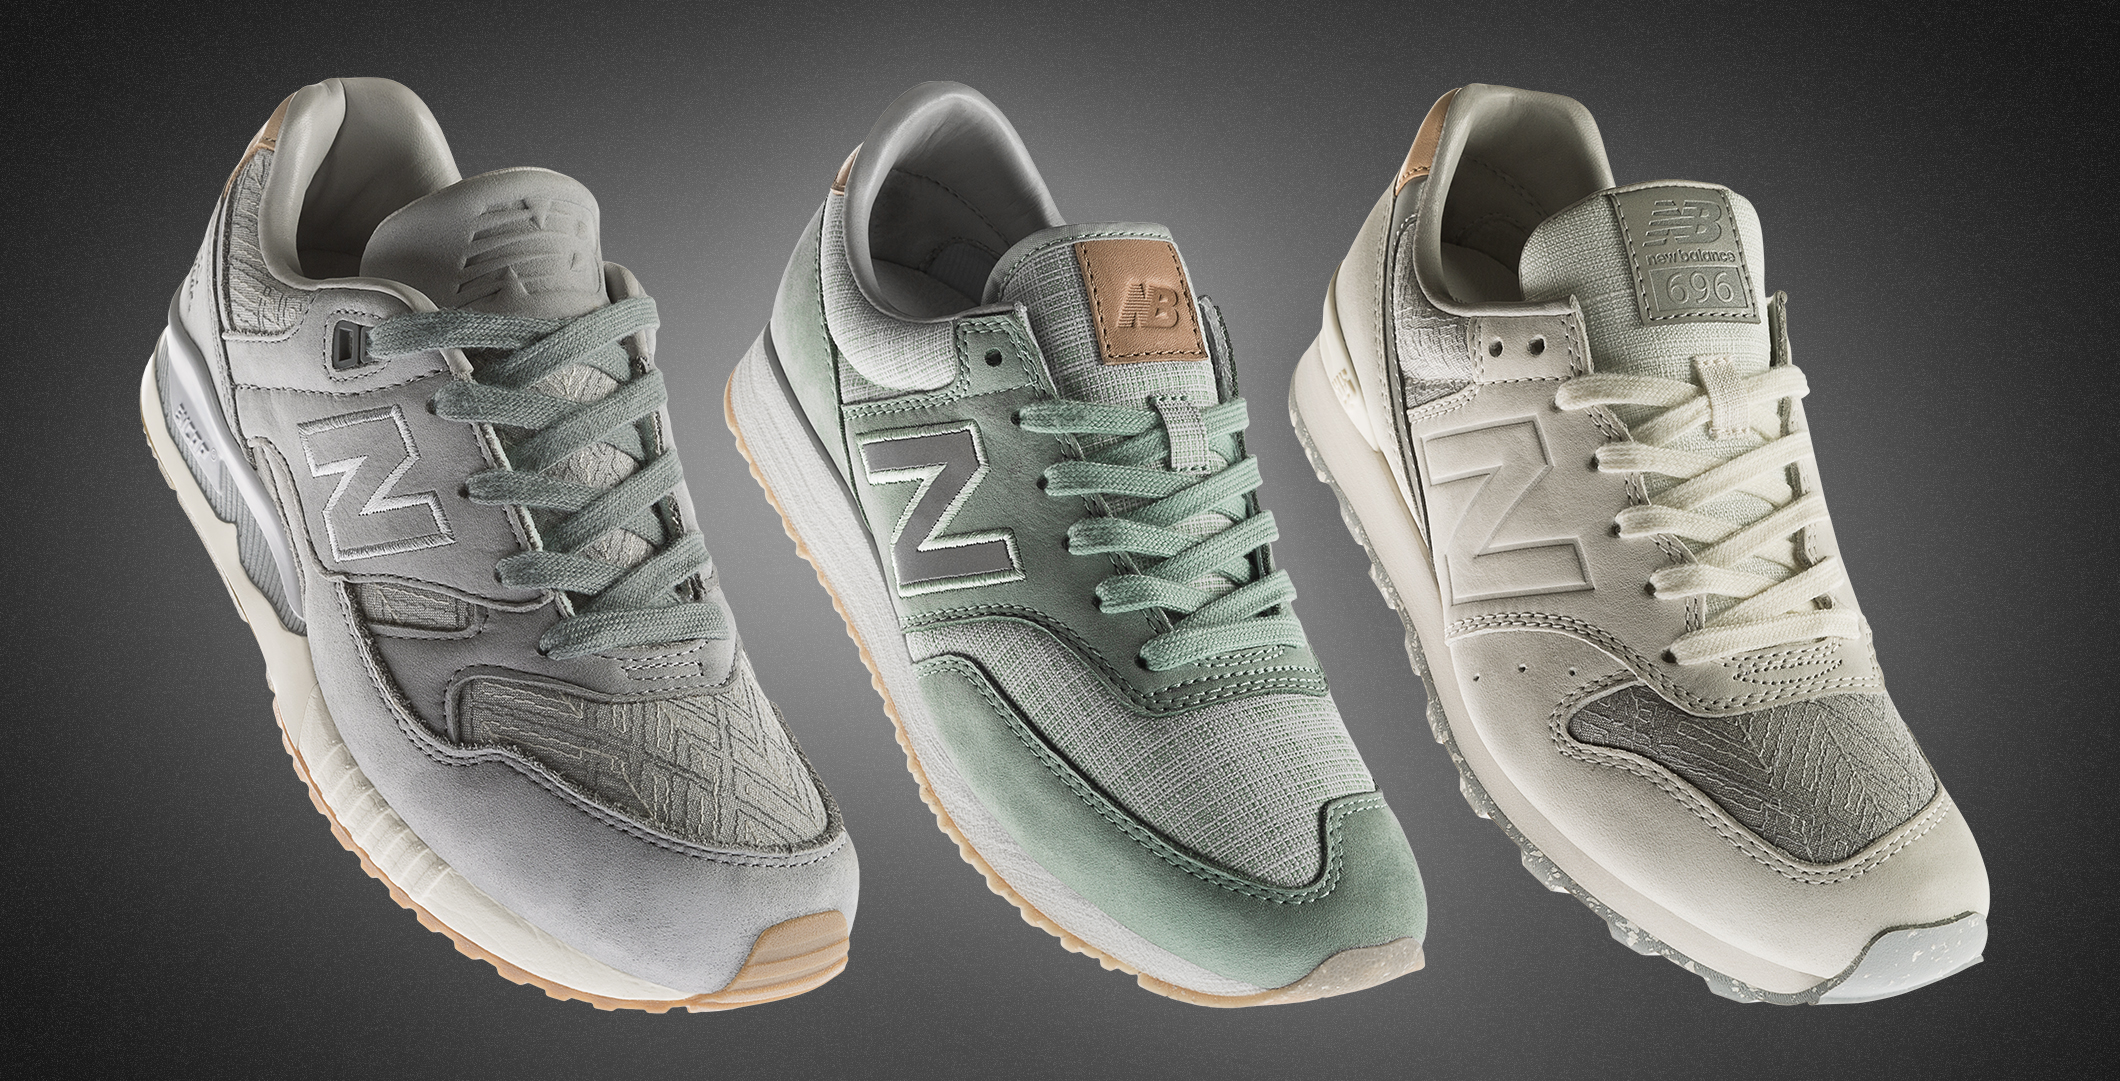 NB Grey new balance capsule collection